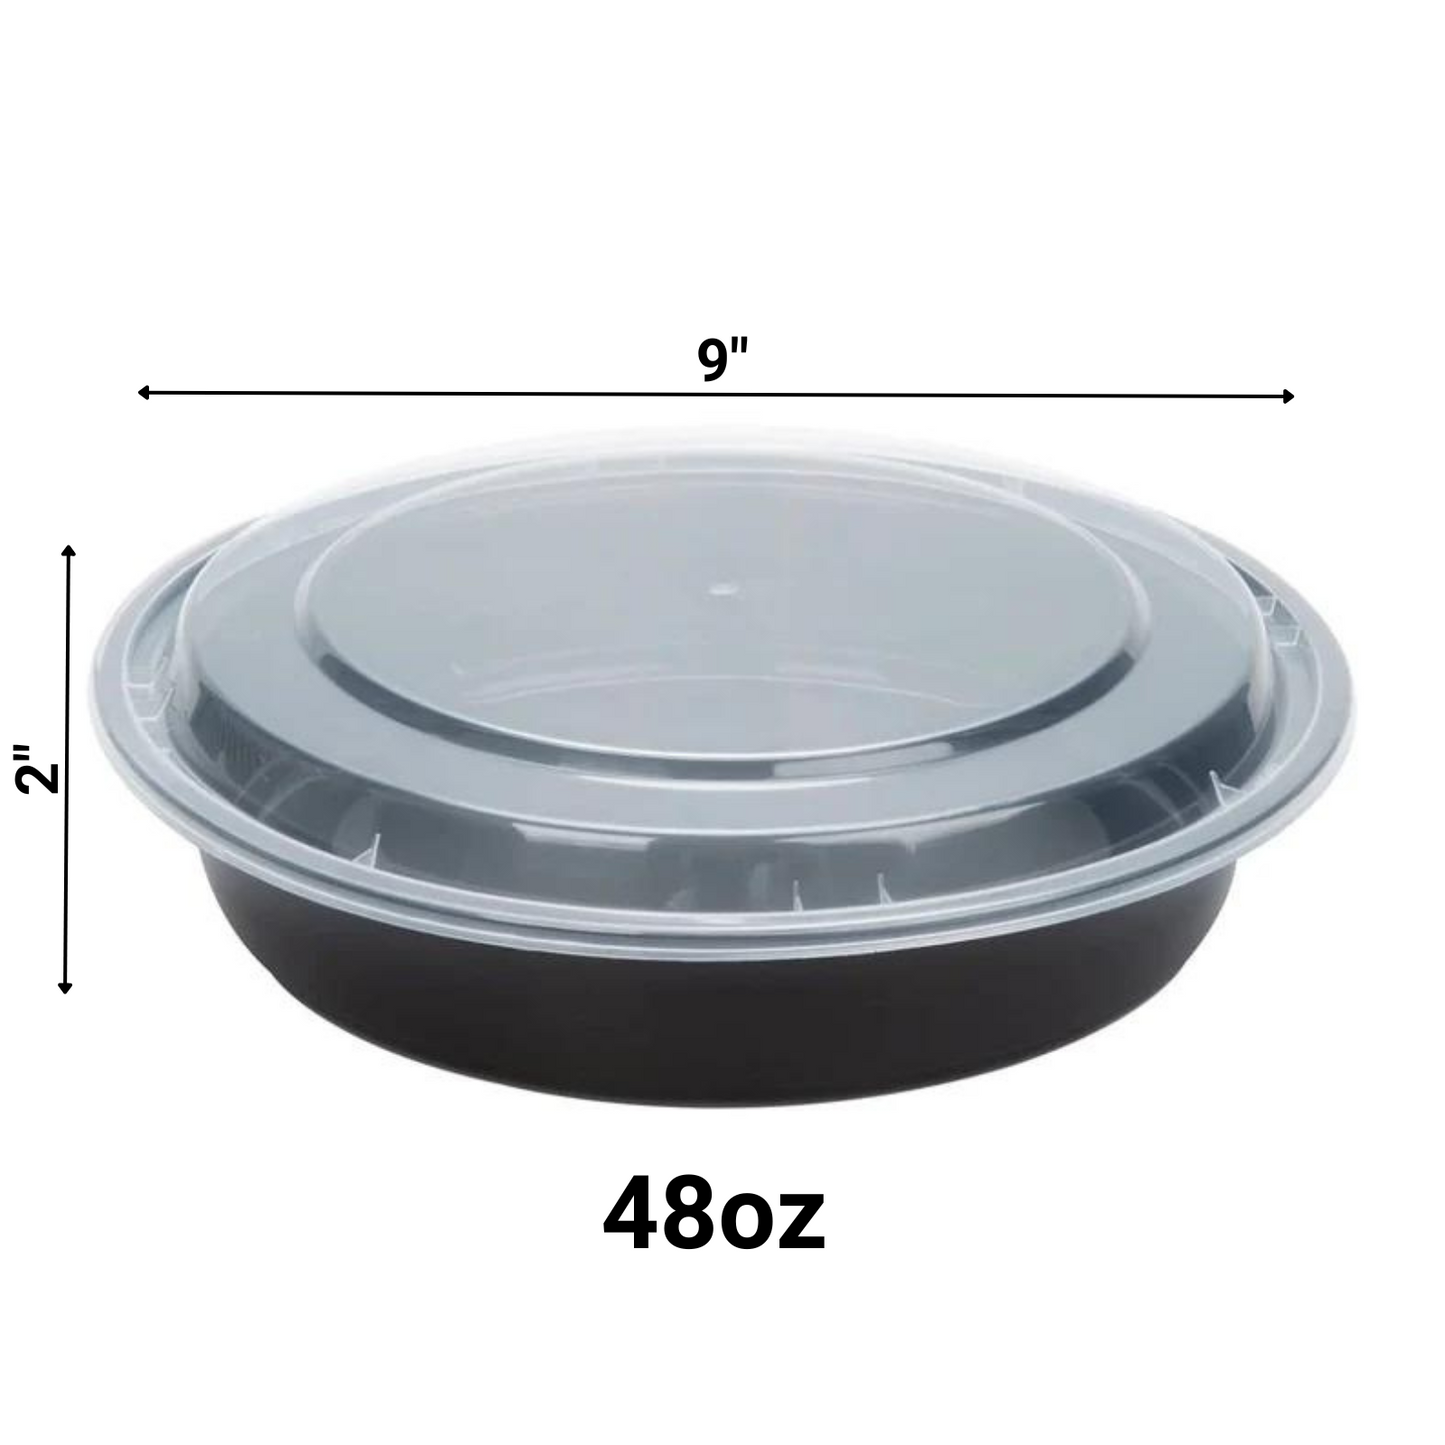 *WHOLESALE*  48oz Black Meal Prep/ Bento Box Container with Clear Lid | 150ct/Case Food Storage & Serving VeZee   